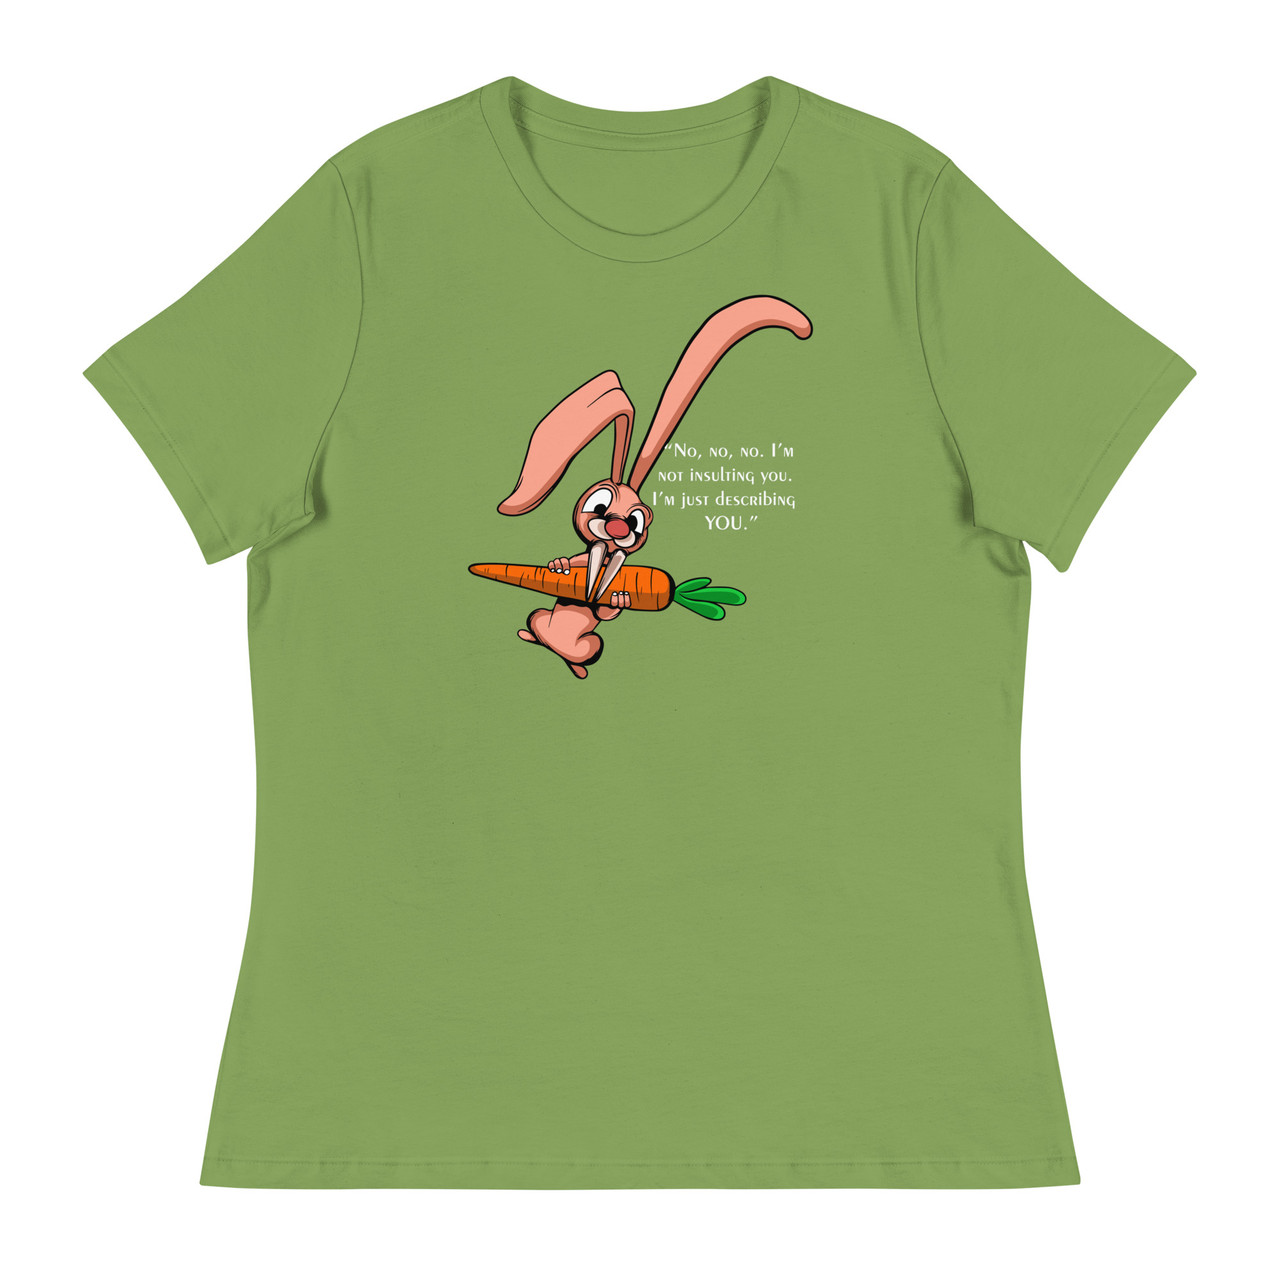 No,no,no I'm not insulting you. I'm just describing you Women's Relaxed T-Shirt - Bella + Canvas 6400 